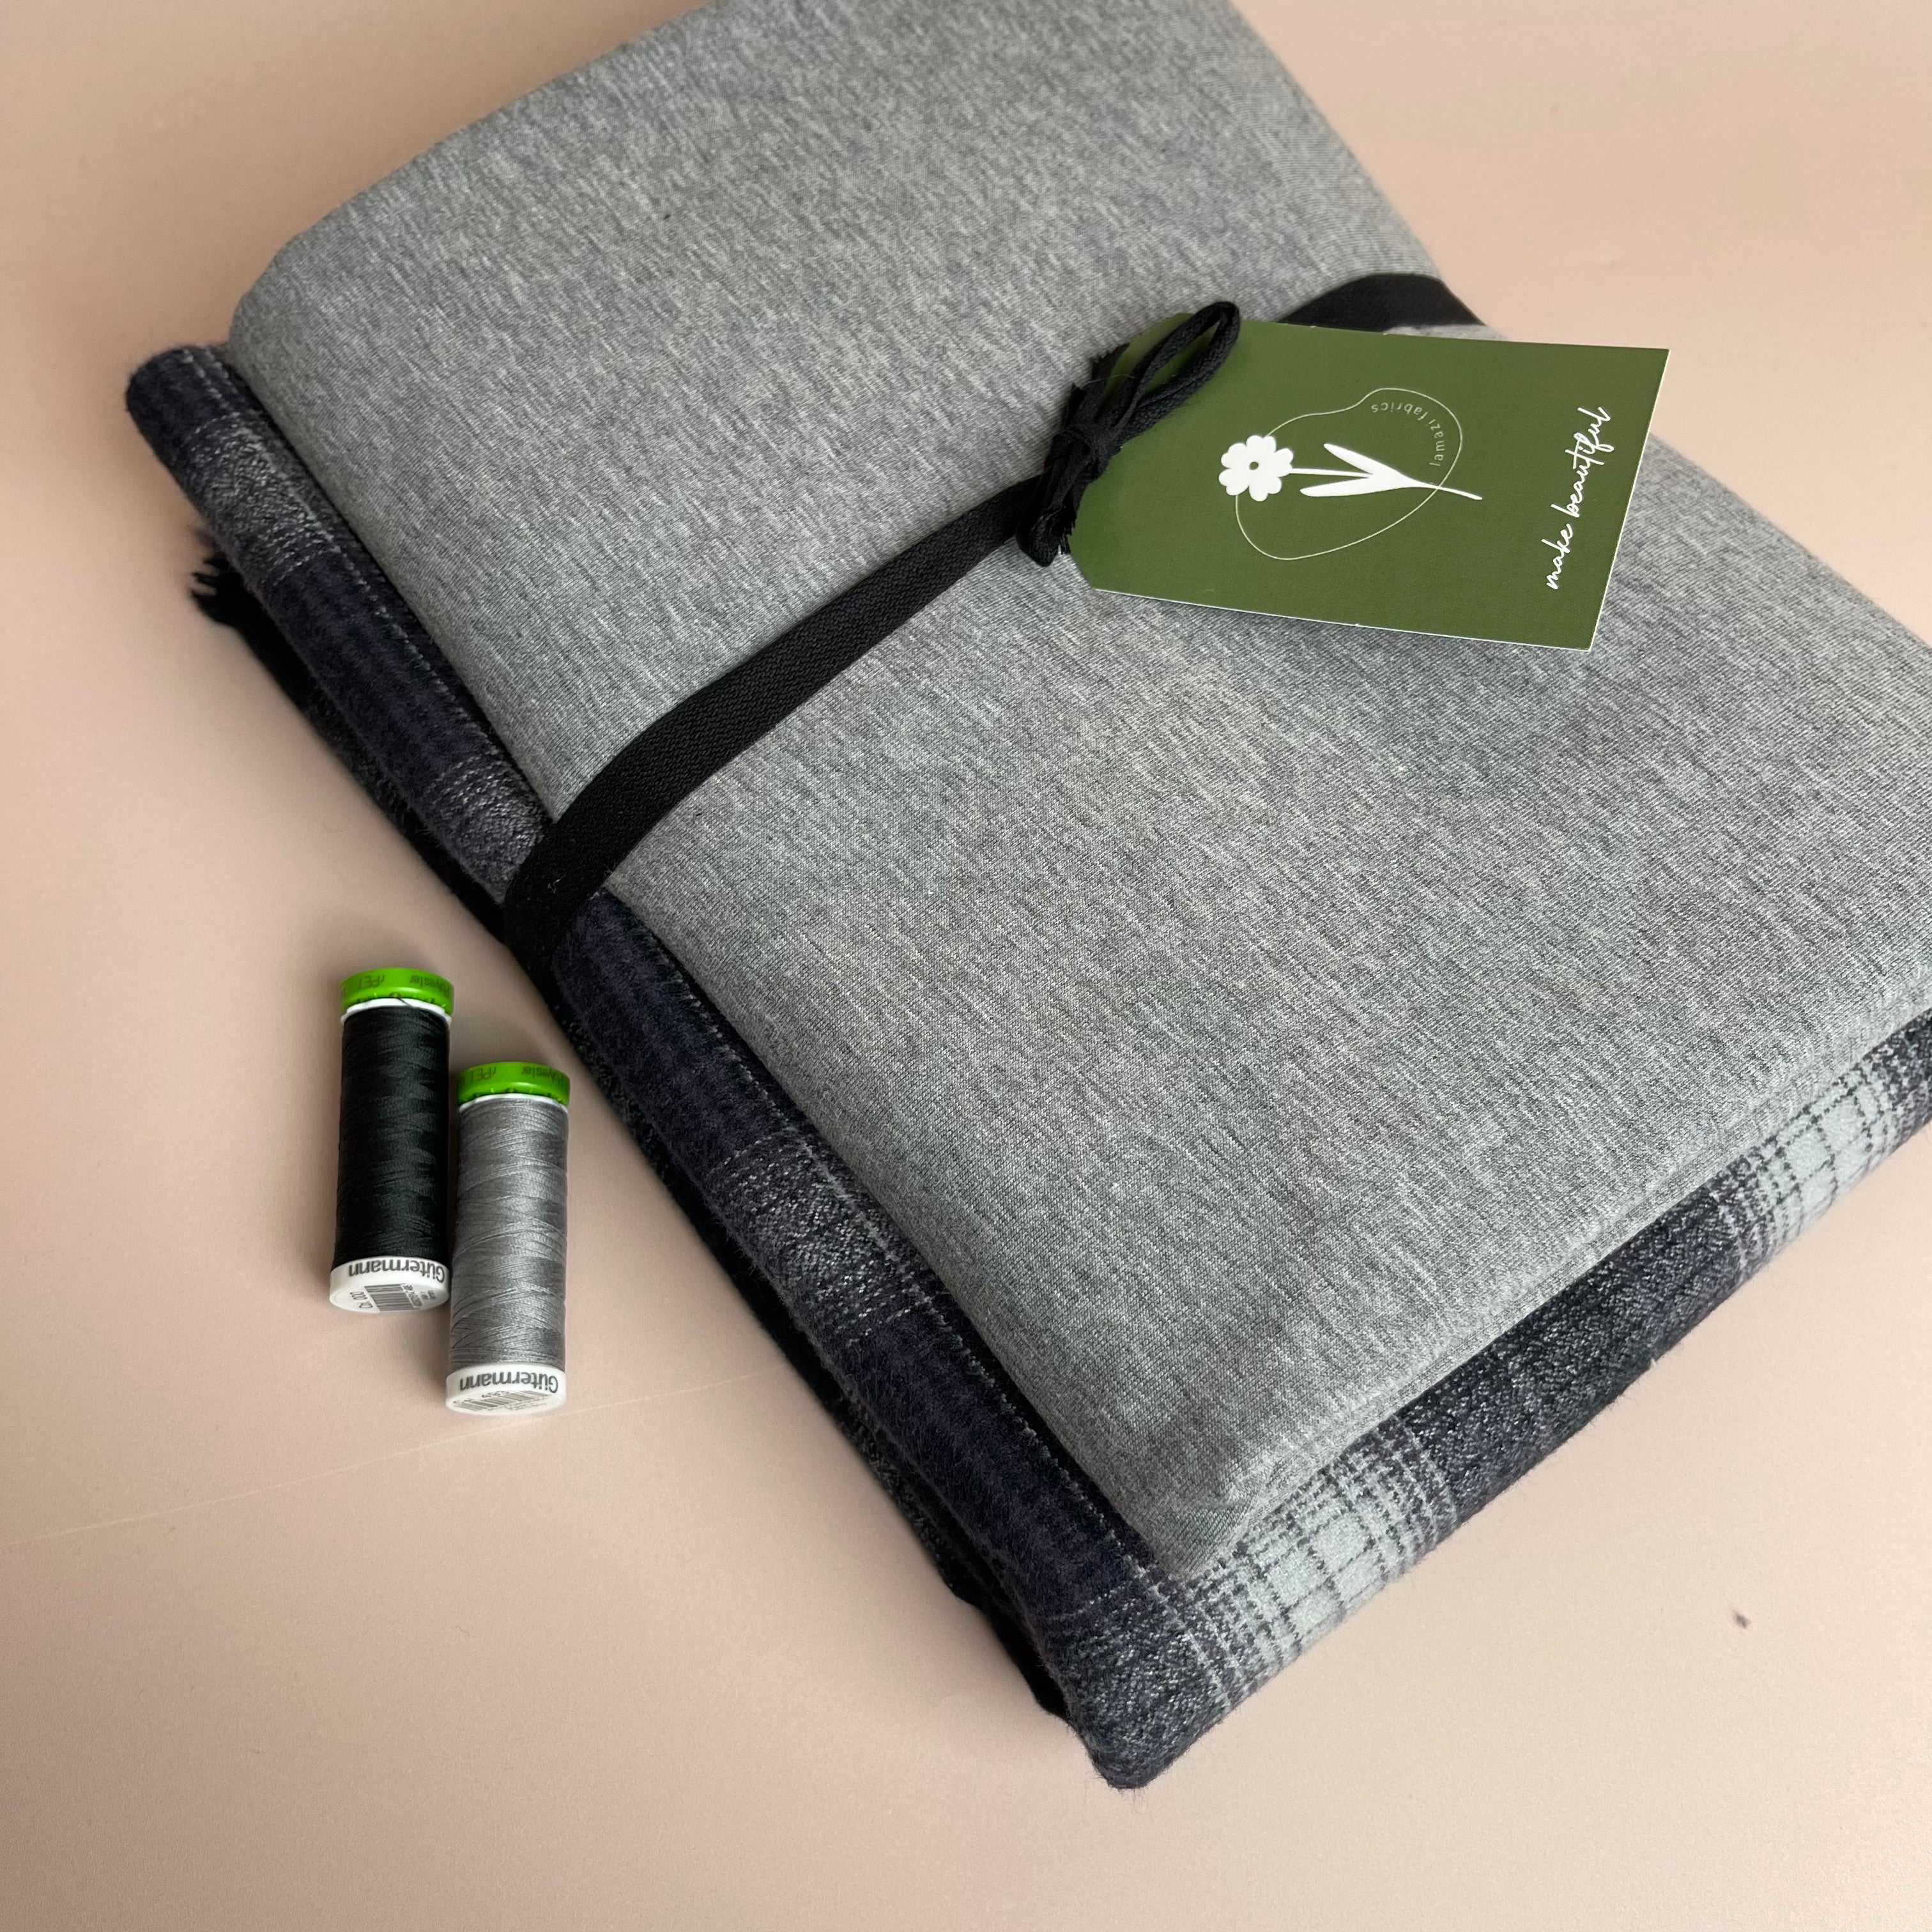 Limited Edition - Luxury Pyjama Kit with Charcoal Check Cotton Flannel